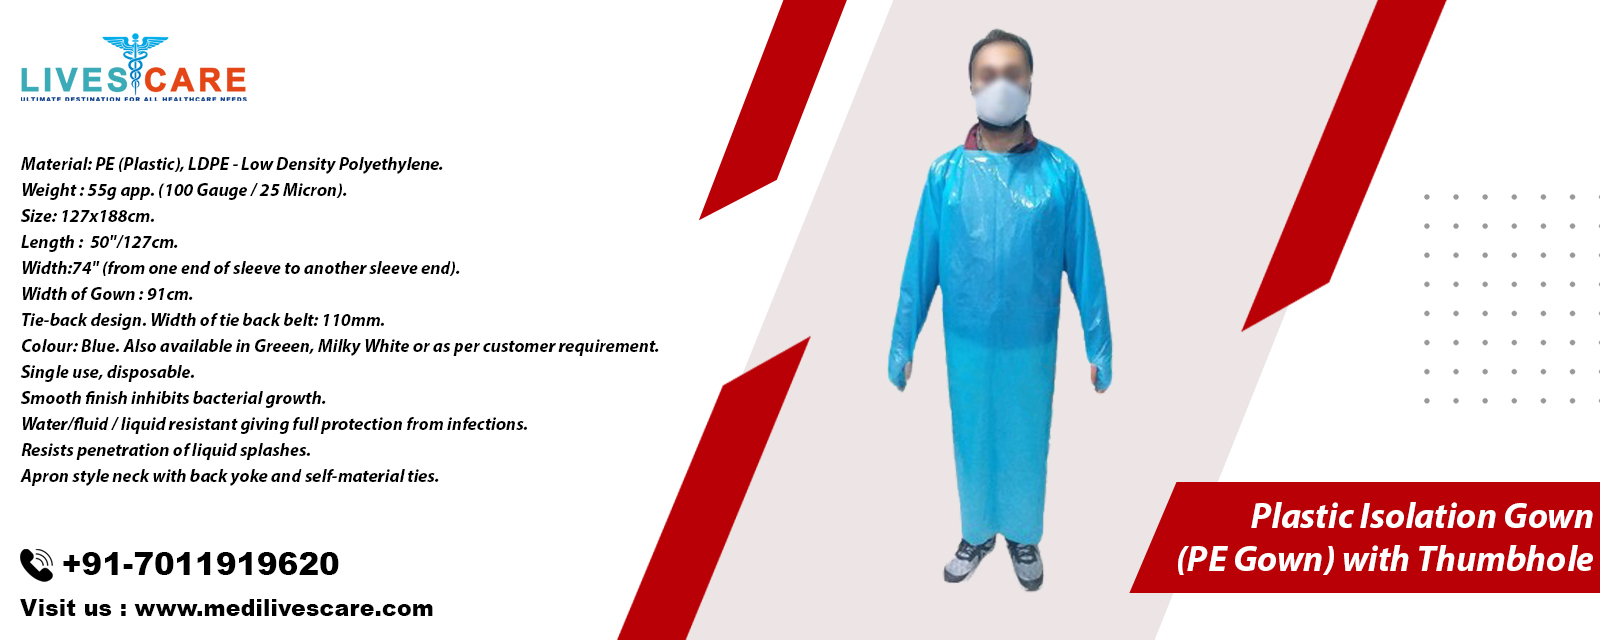 Plastic Isolation pe Gown with Thumbhole
Plastic Isolation pe Gown with Thumbhole Manufacturers
Plastic Isolation pe Gown with Thumbhole Manufacturers in India
Plastic Isolation pe Gown with Thumbhole Exporters in India
Plastic Isolation pe Gown with Thumbhole Suppliers in India